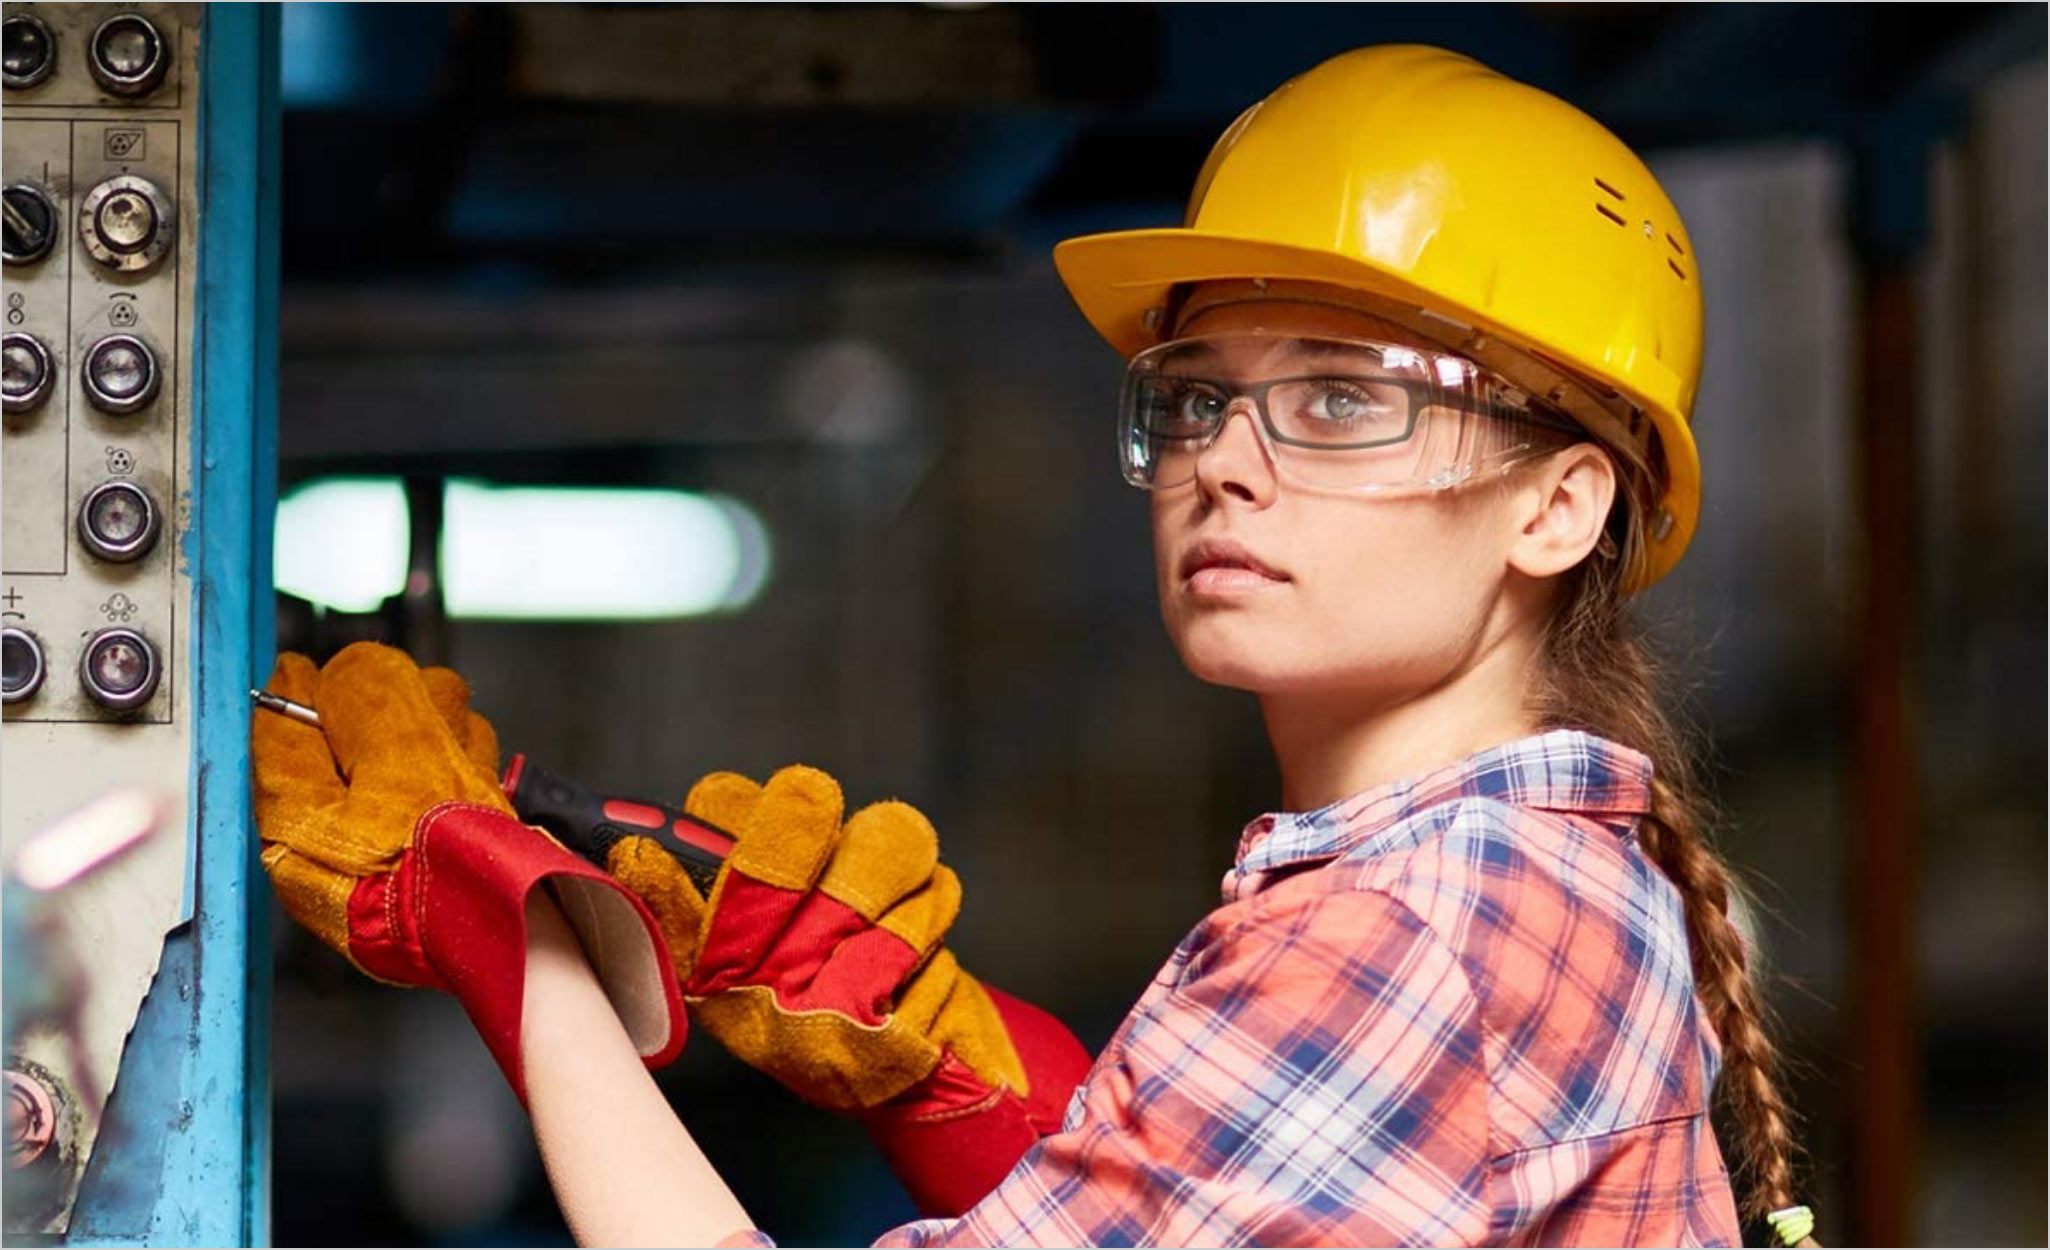 A worker wears safety goggles over her glasses.